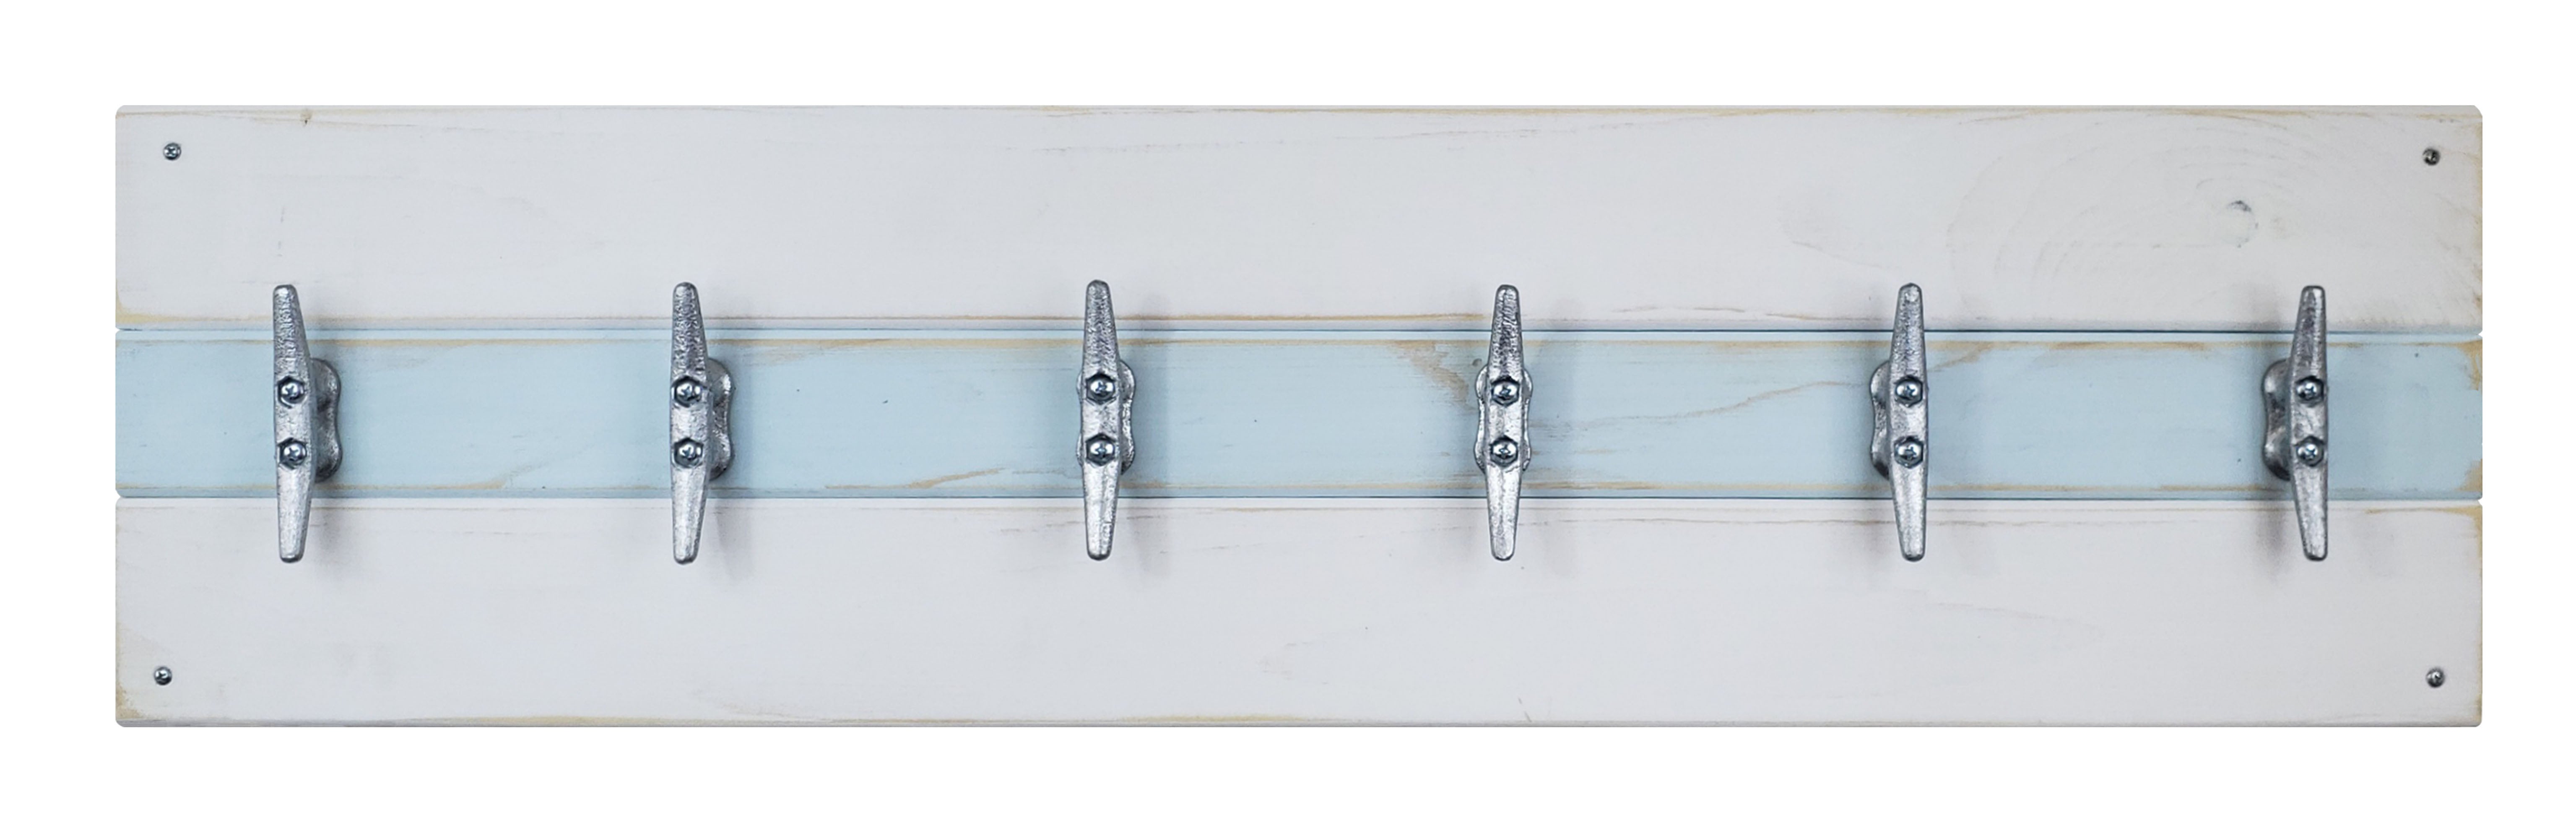 Cape May Boat Cleat Wall Hooks - 400 Color Combinations, Bright Ivory White, Sky Blue